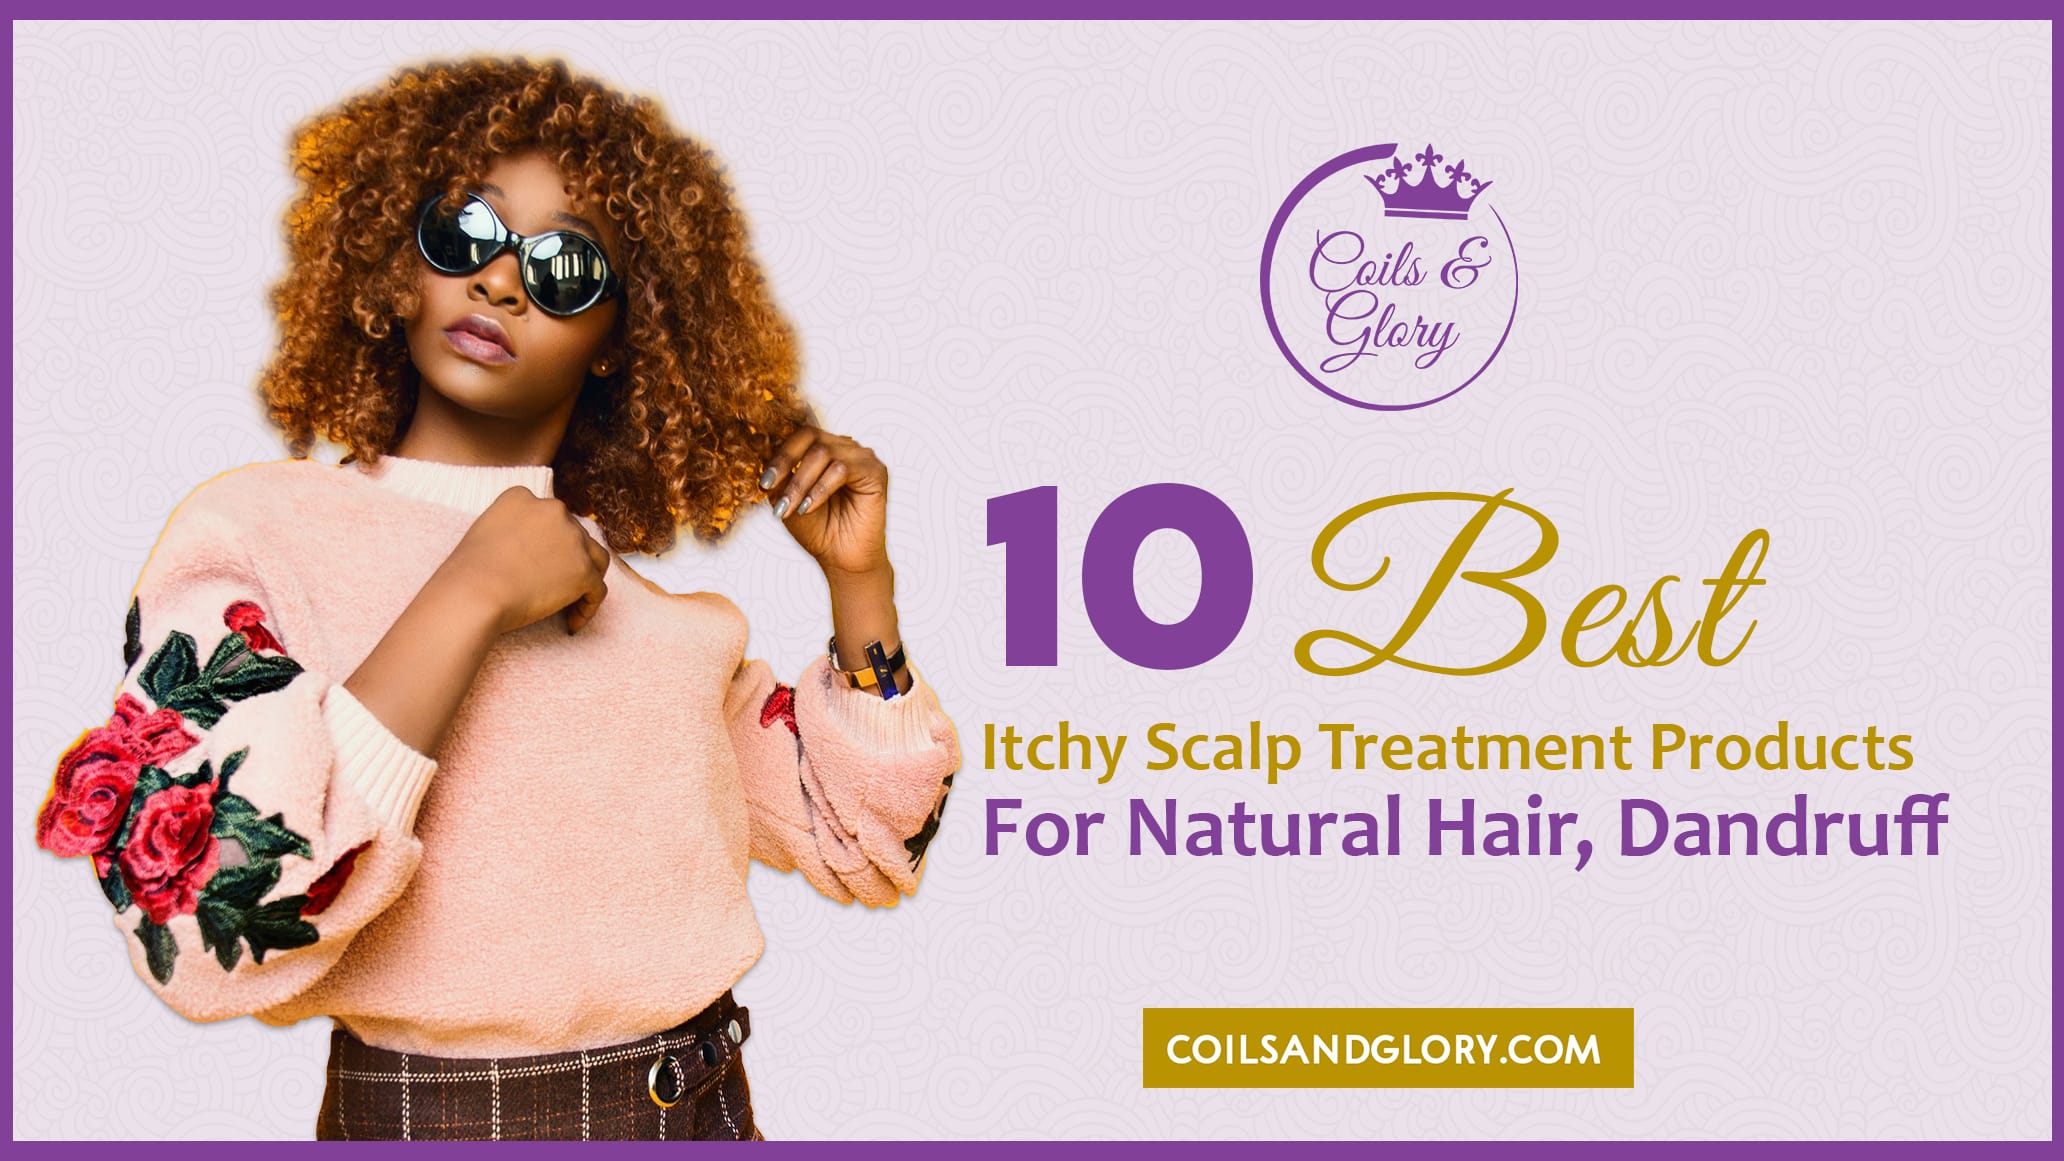 10 Best Itchy Scalp Treatment Products For Natural Hair - Coils and Glory